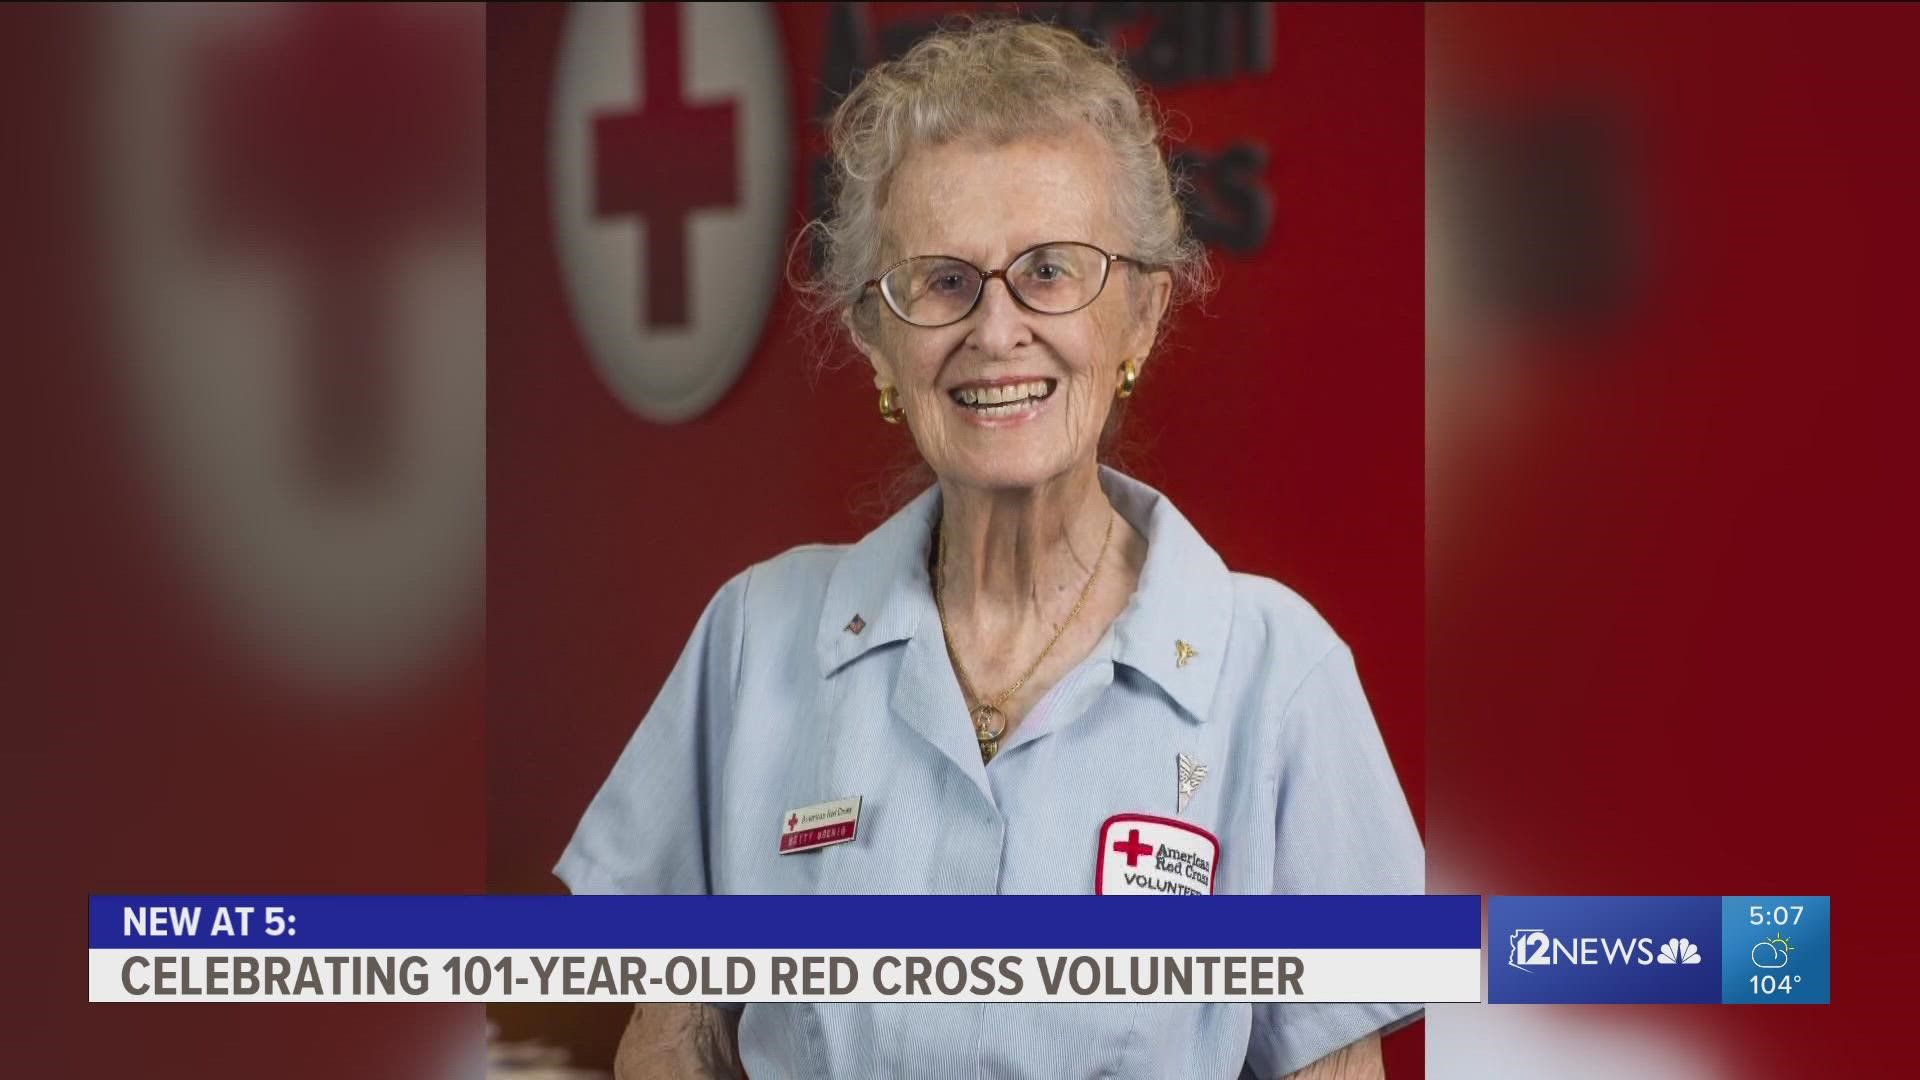 Betty Grenig has spent decades volunteering for the Red Cross and donating lots of her own blood. The local chapter recently celebrated Betty's 101st birthday.